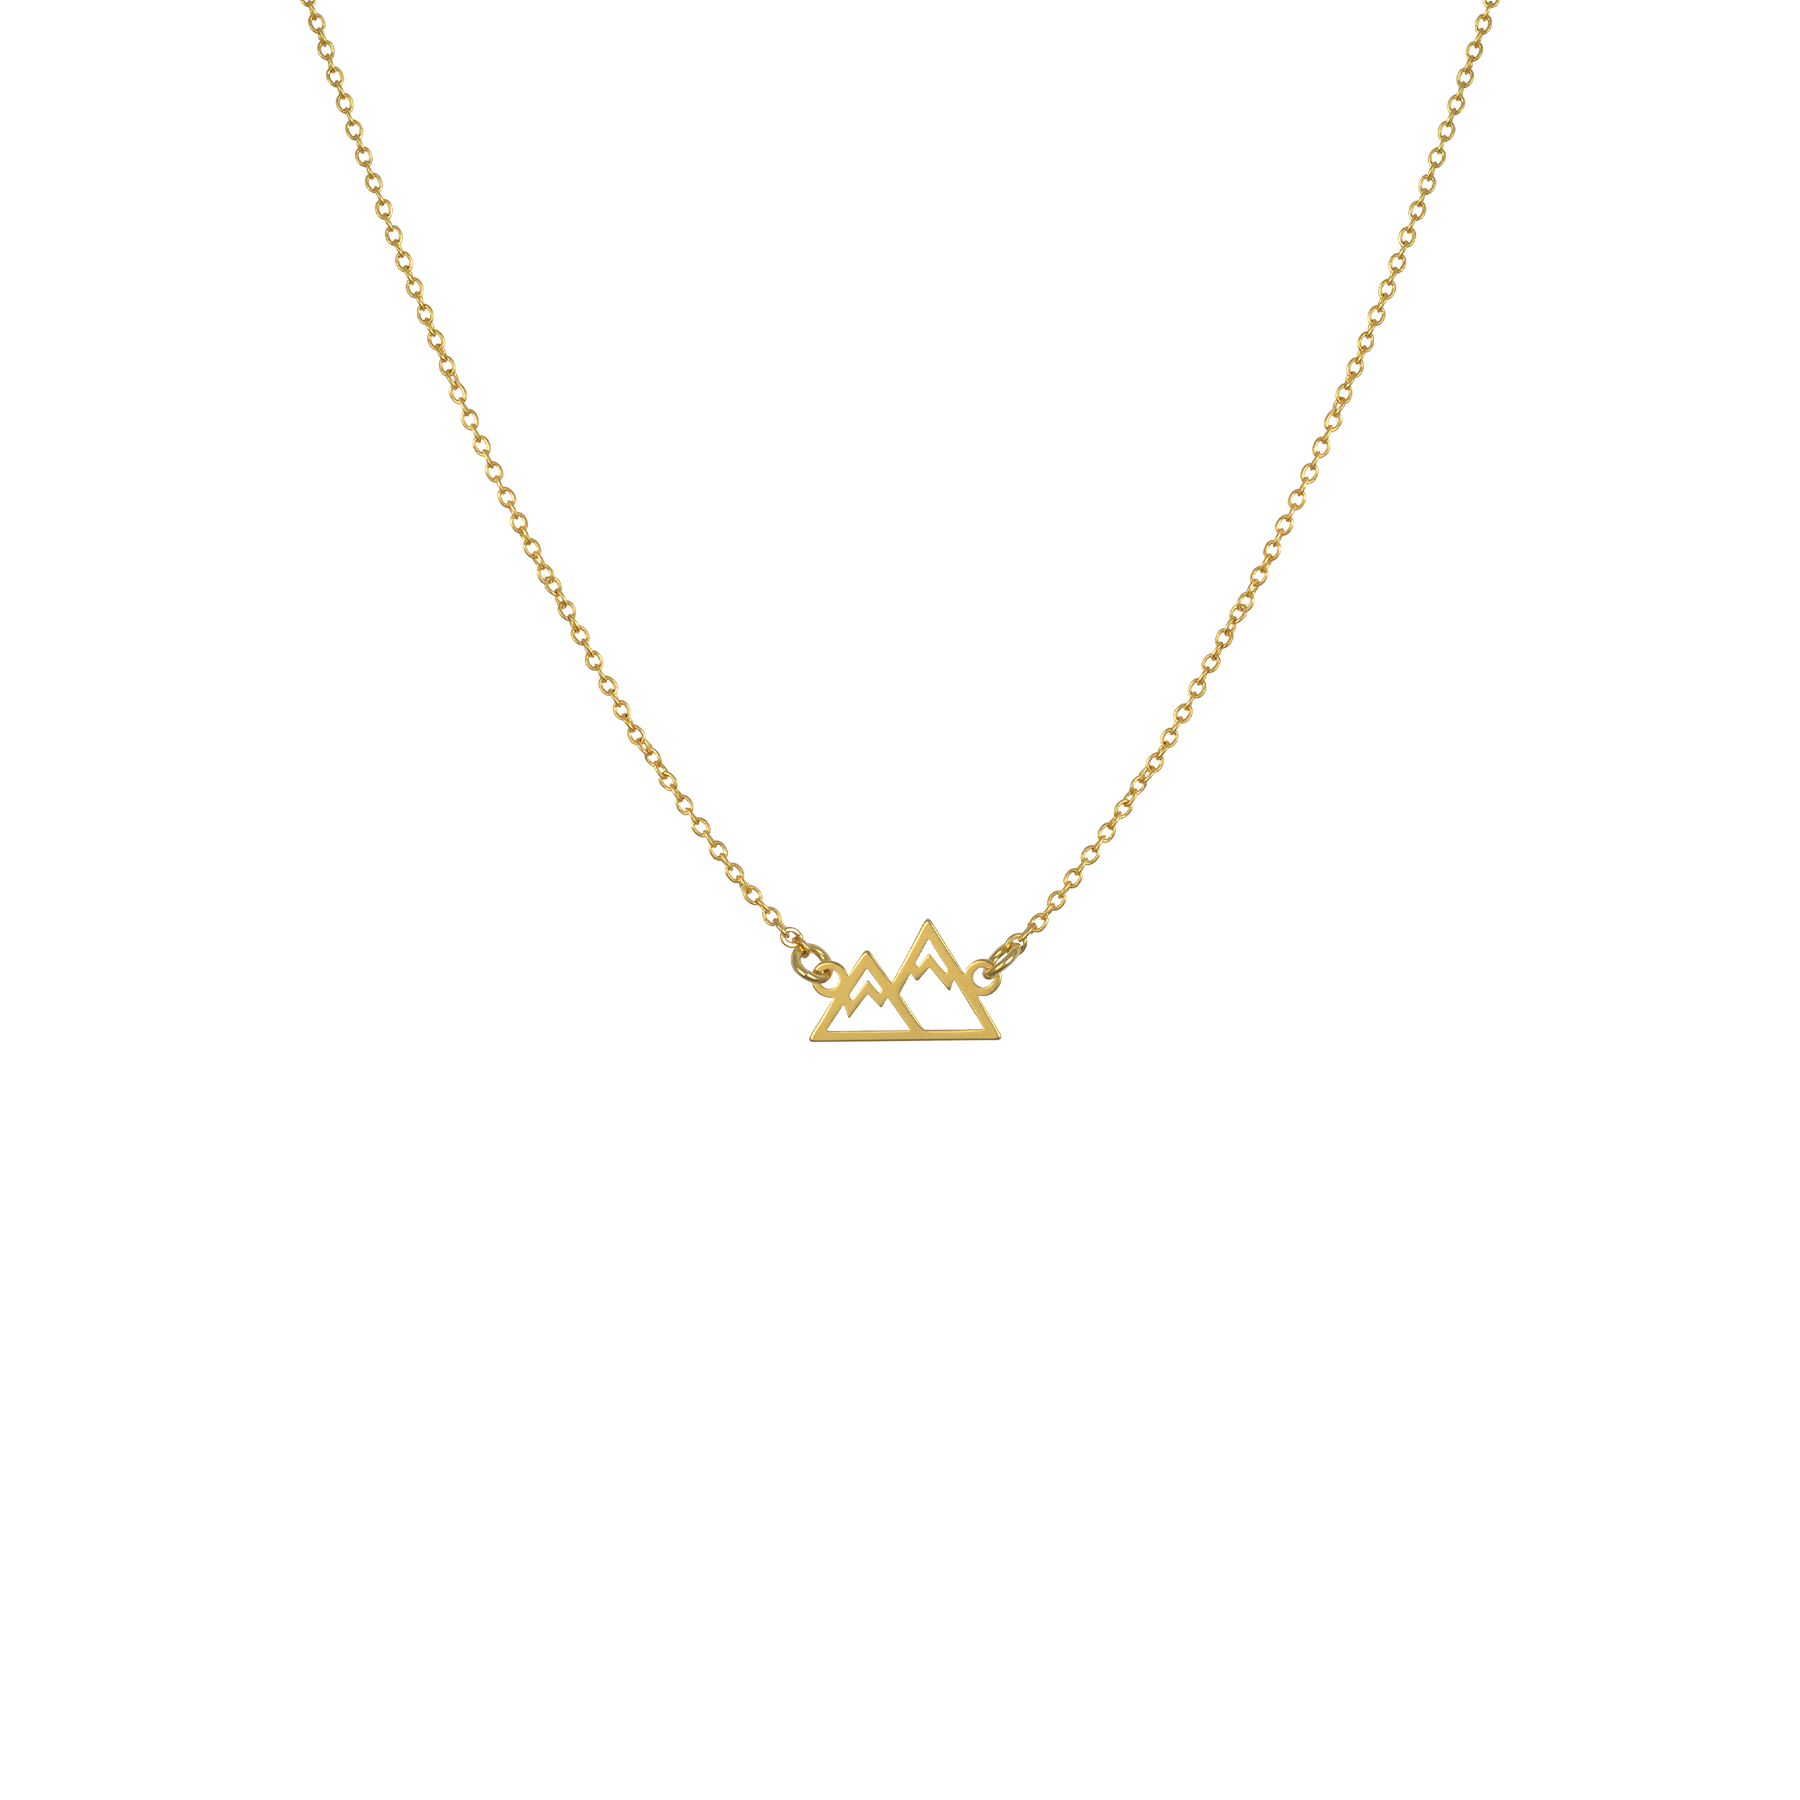 Small gold mountain necklace